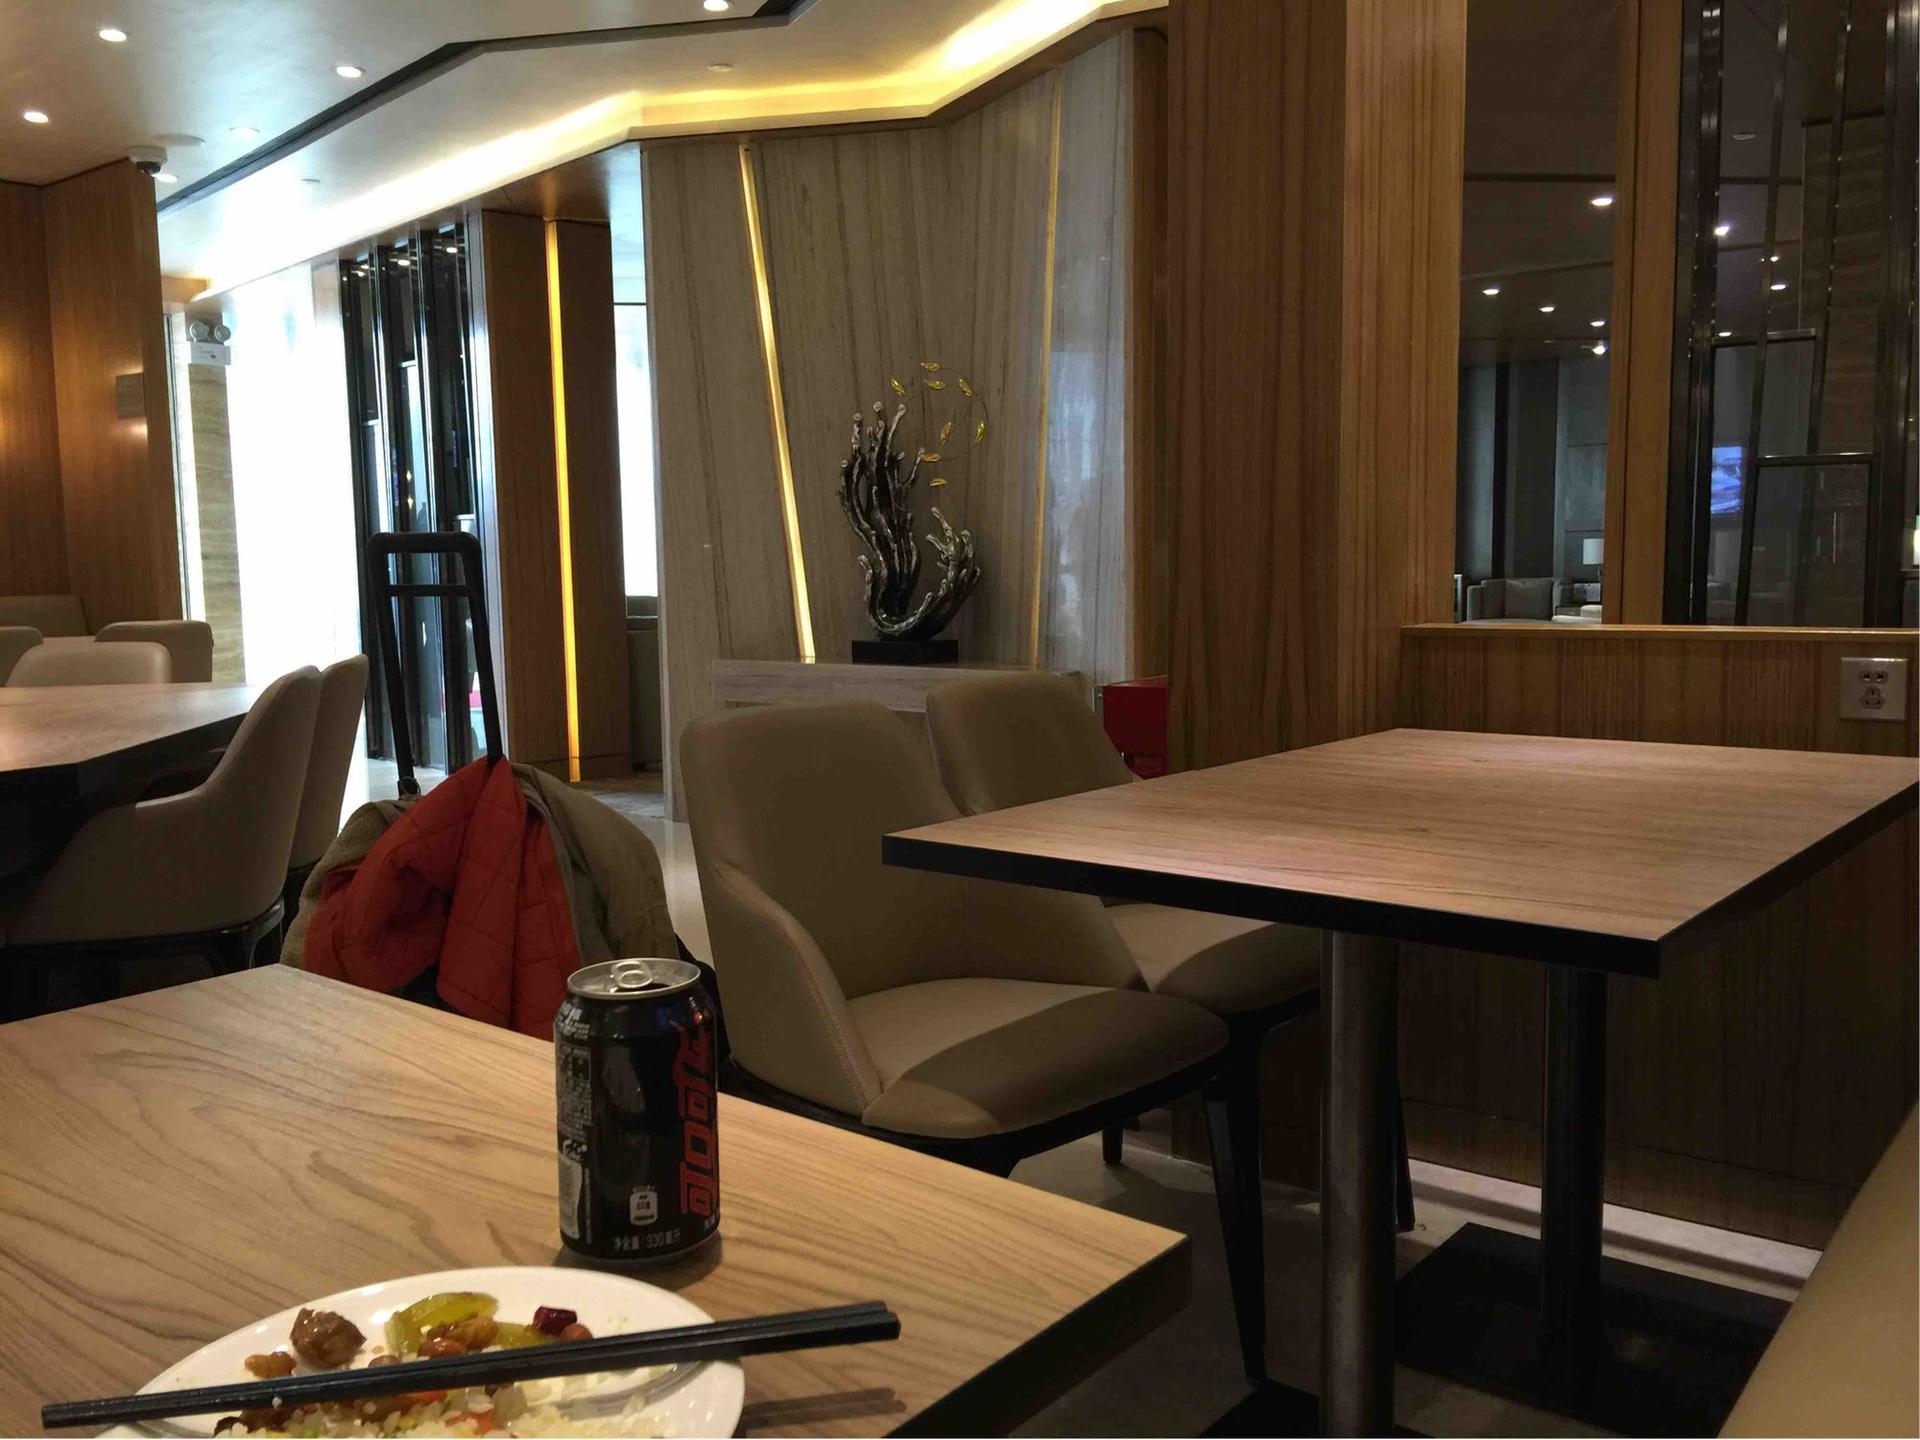 Baiyun Airport First Class Lounge (Closed For Renovation) image 4 of 10